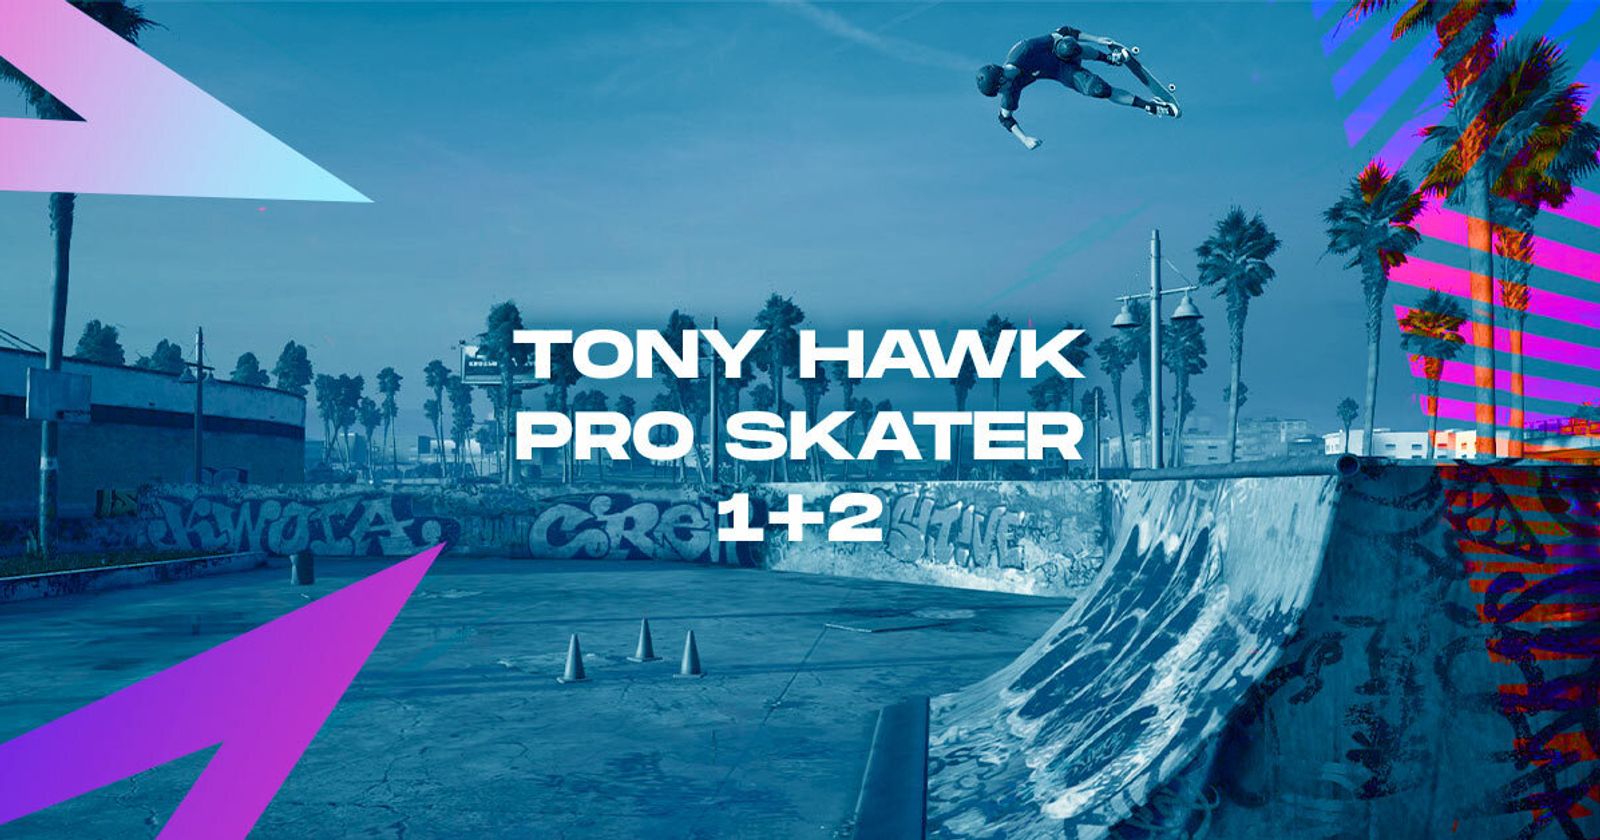 Tony Hawk Pro Skater 1+2 2020 review – this '90s classic is better than  ever in 4K